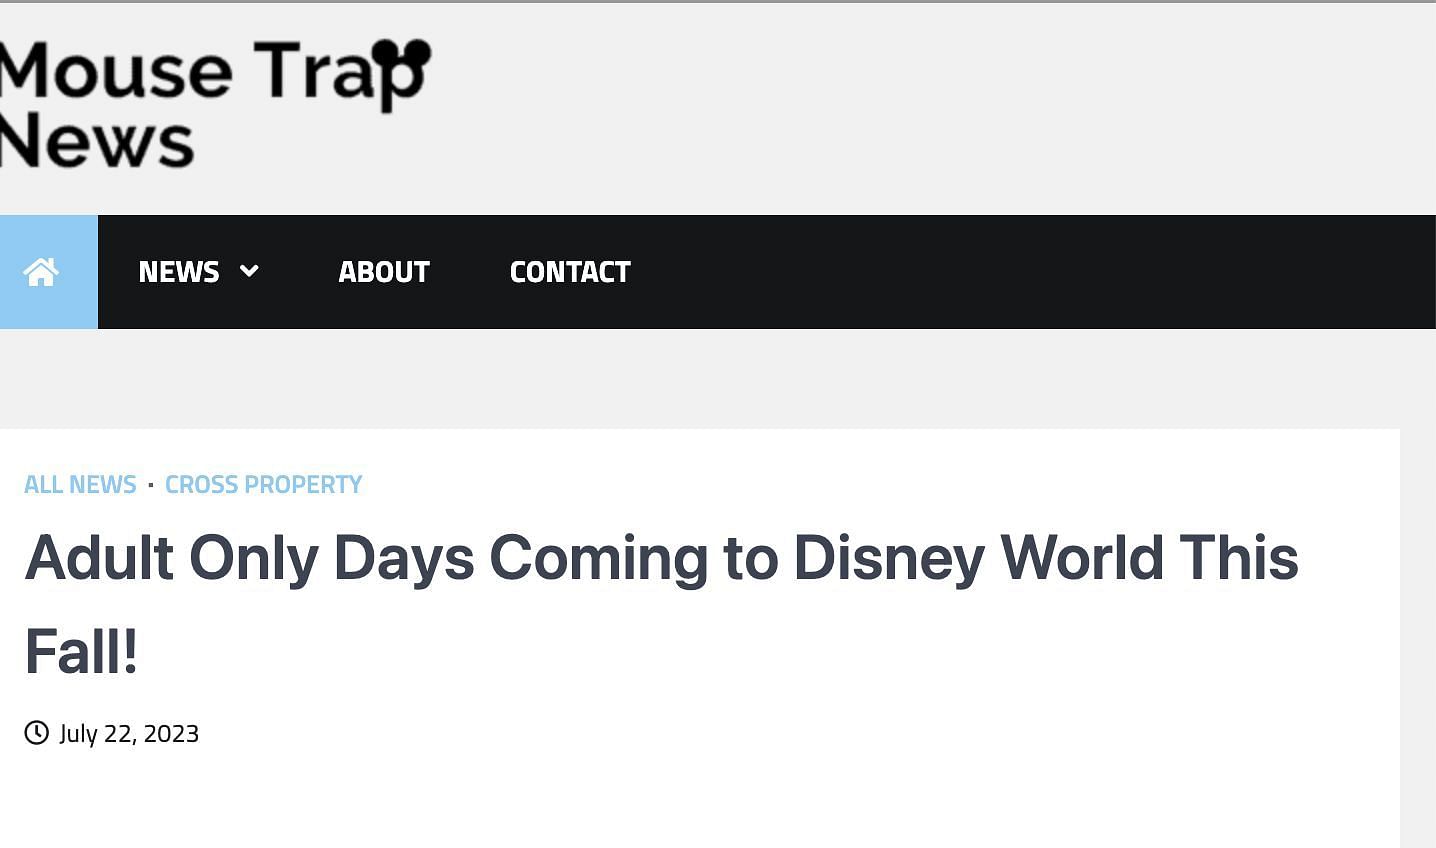 Mouse Trap News is spreading rumors that the park is coming up with &quot;adult-only days.&quot; (Image via Mouse Trap News)